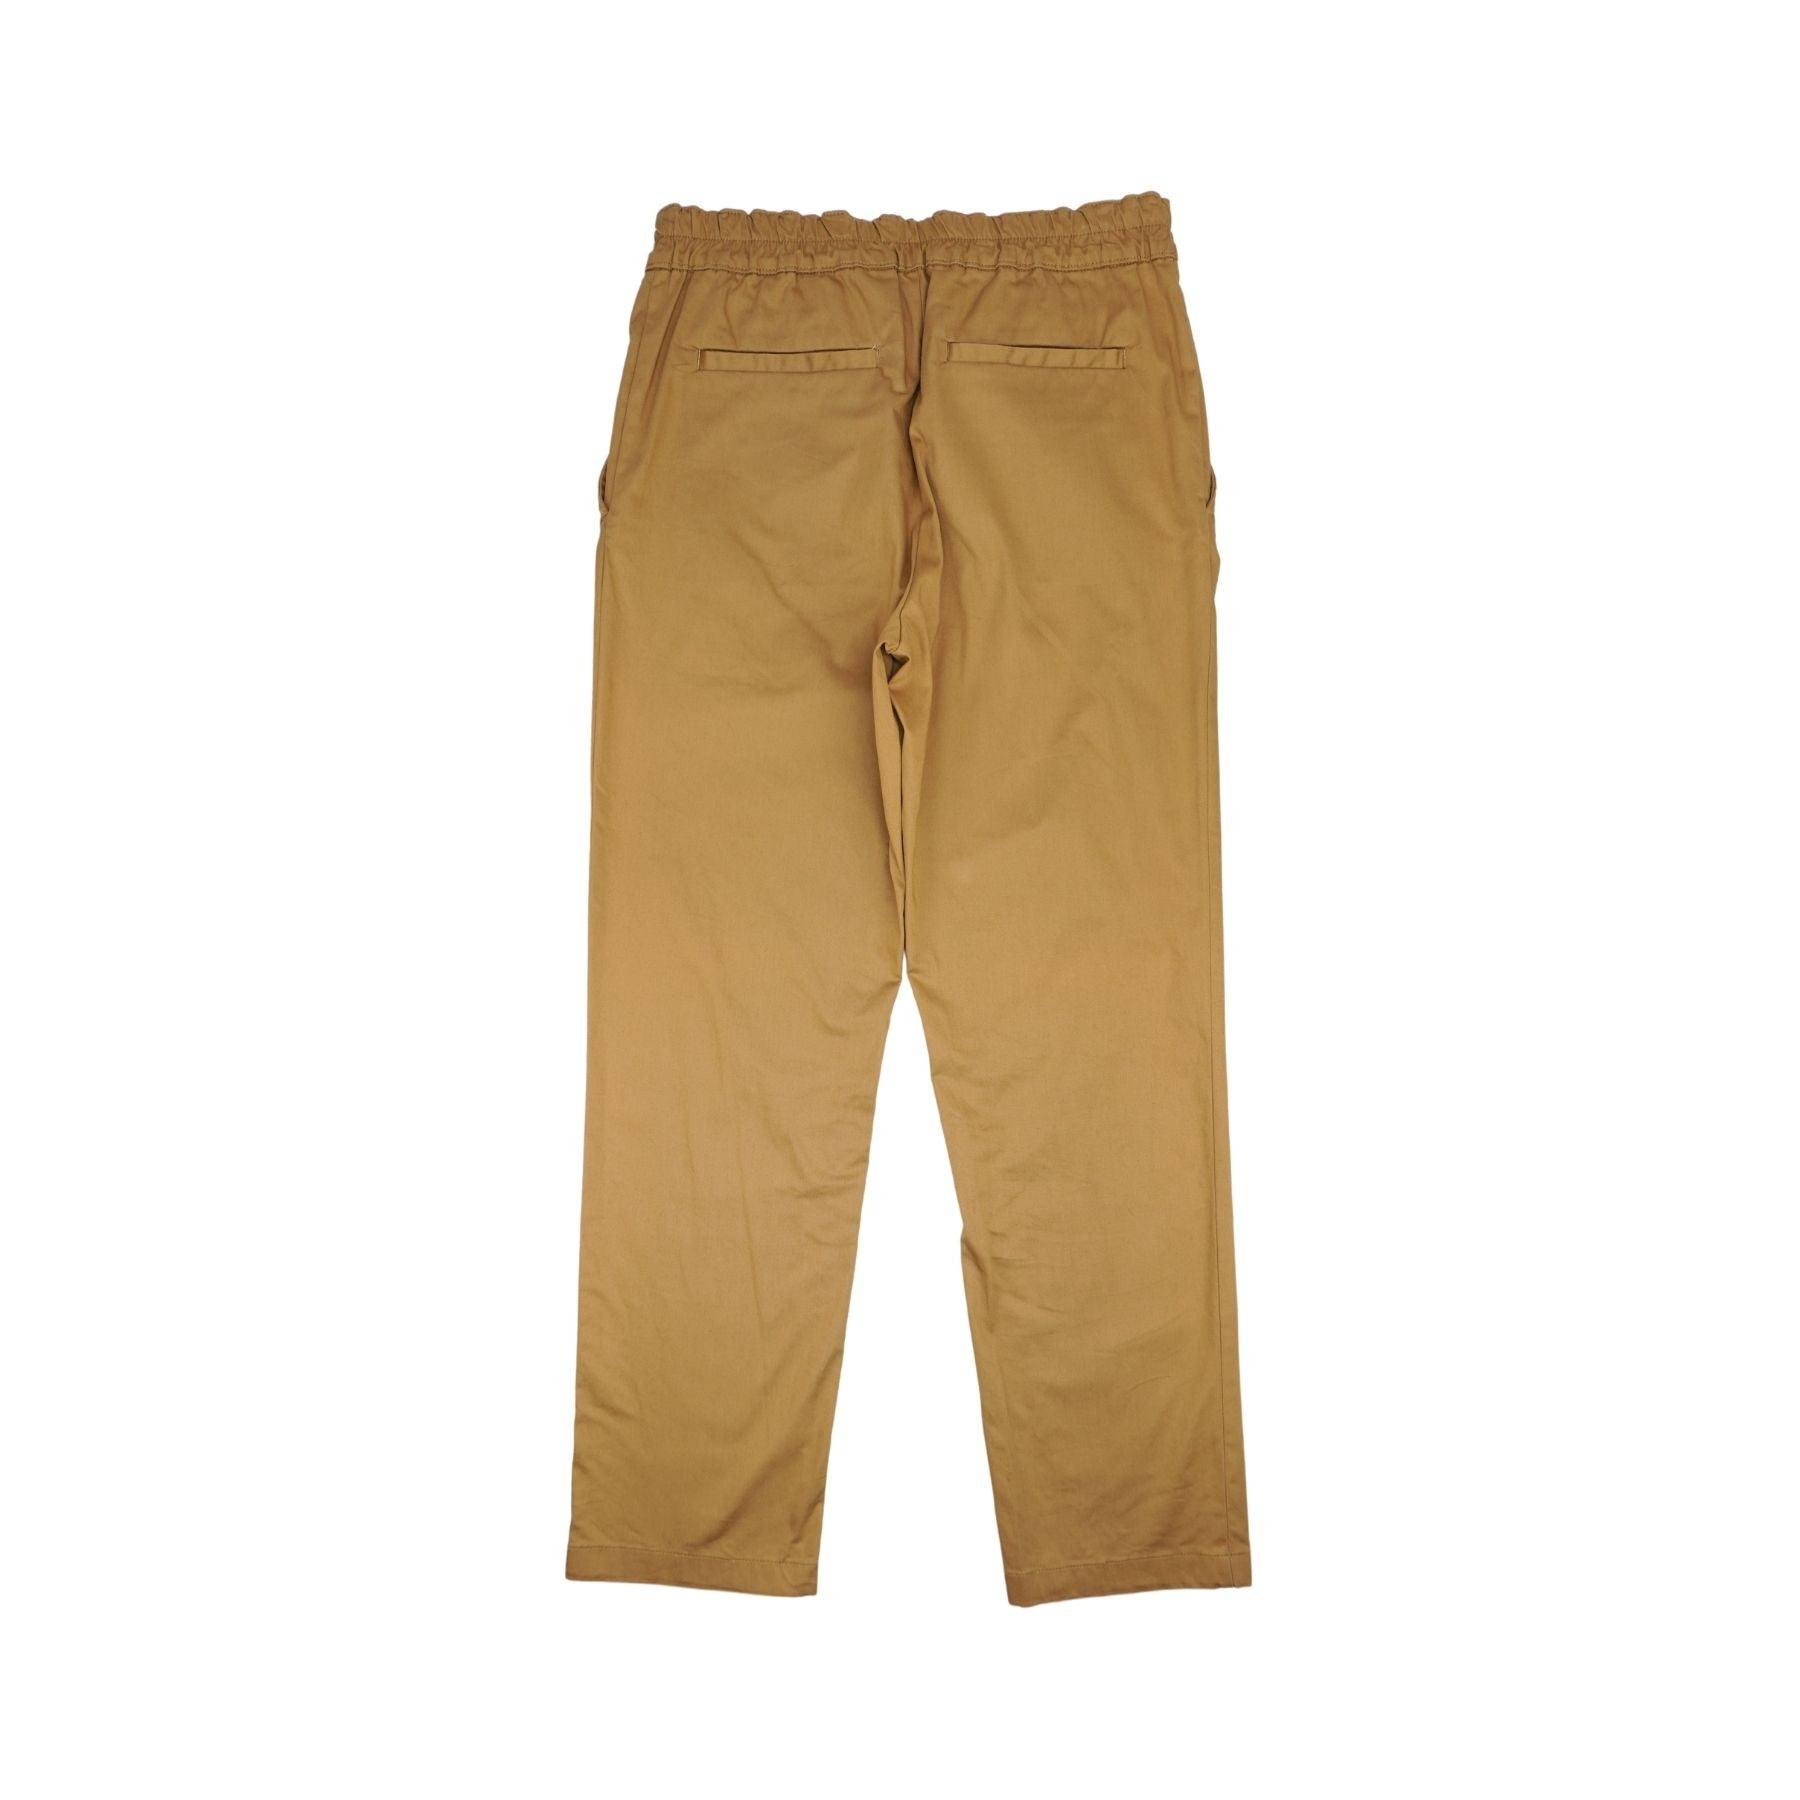 Acne Pants - Men's 48 - Fashionably Yours